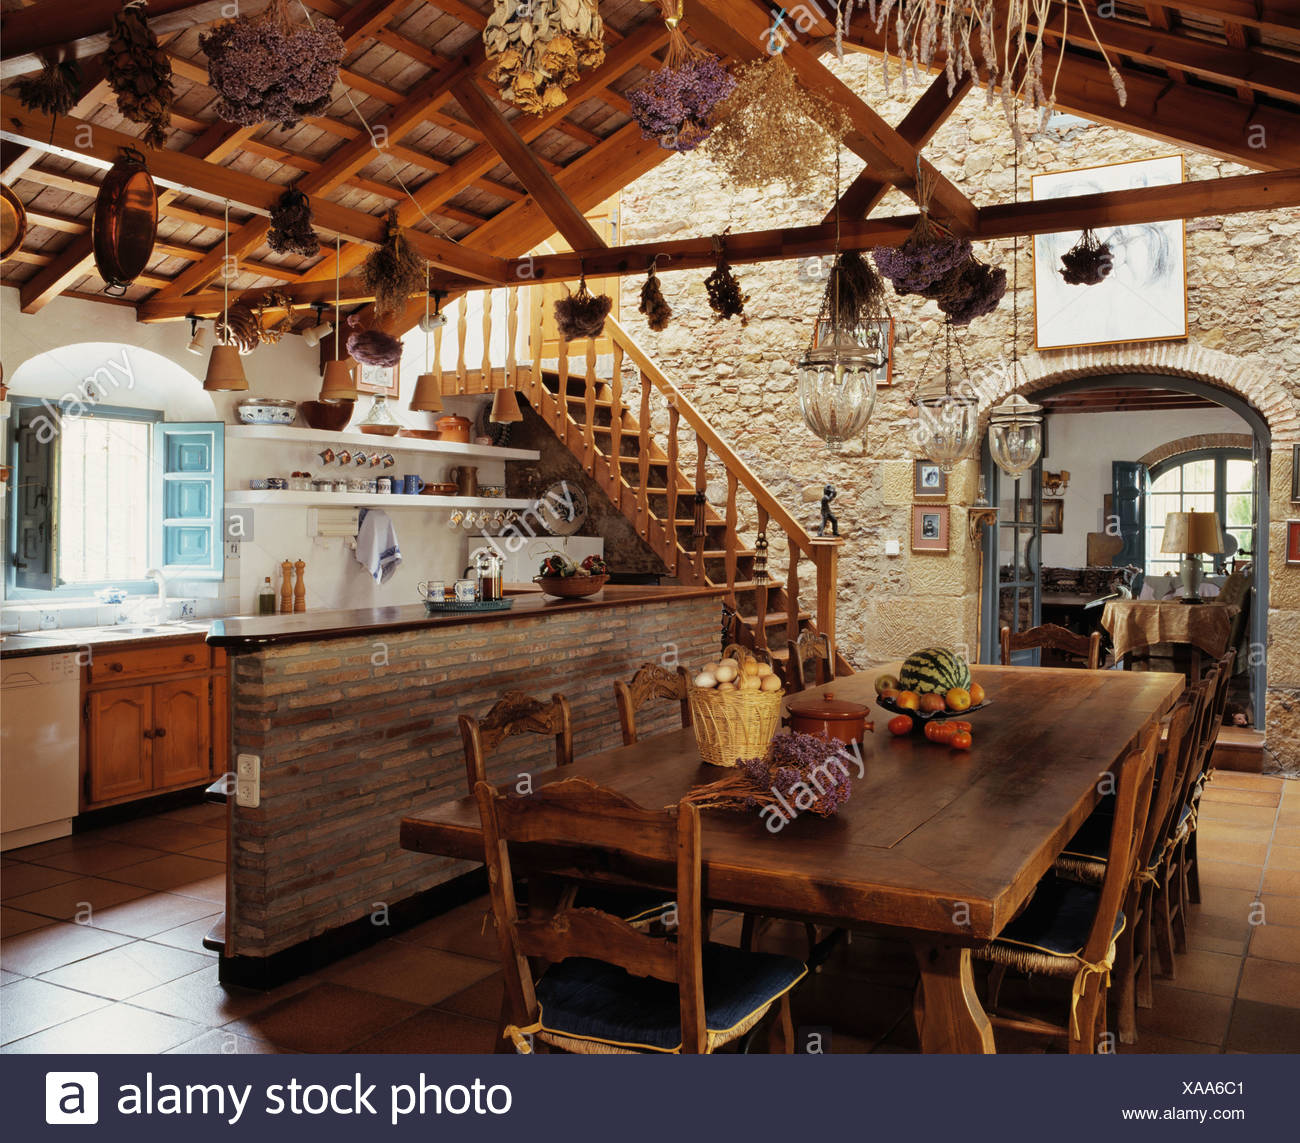 Rustic Wooden Table And Chairs In Dining Area Of Large